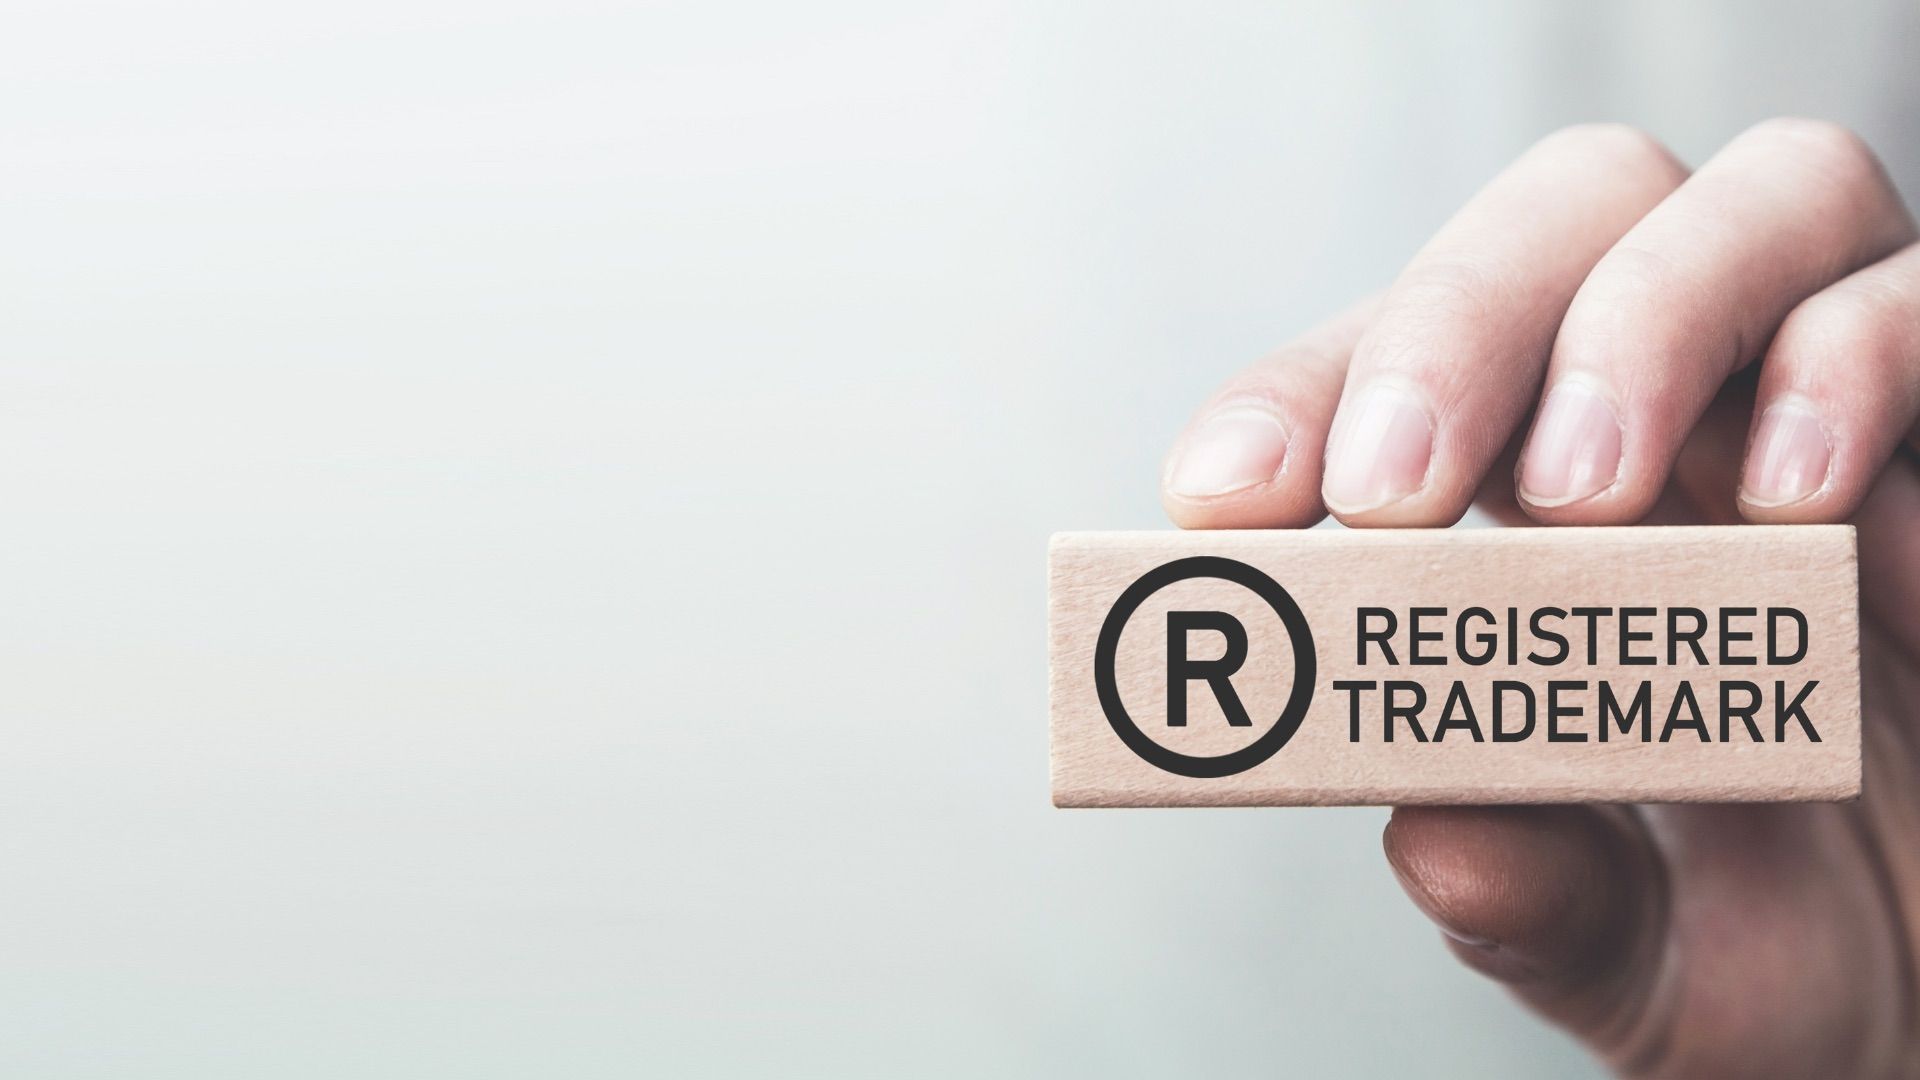 When to File a Trademark